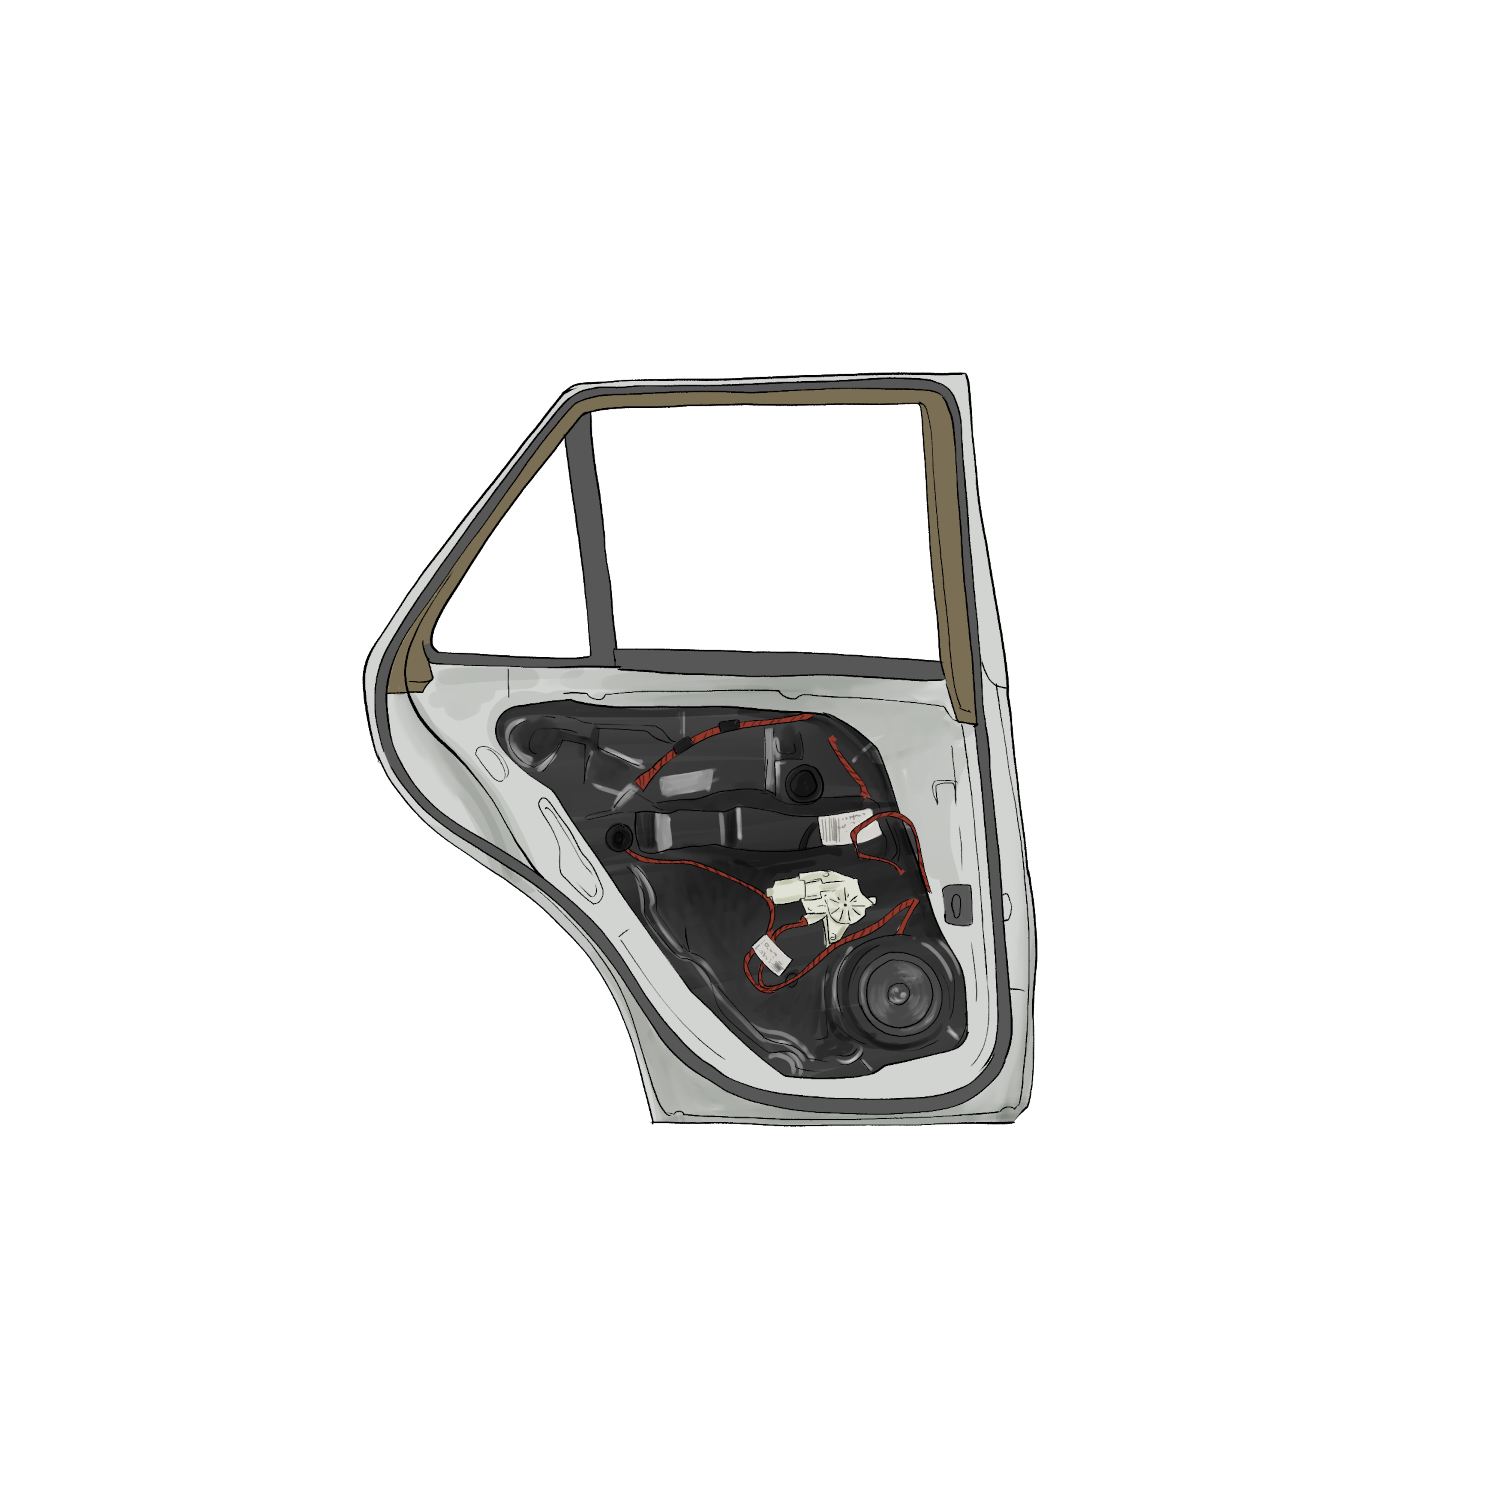  Product image 2 of the product “Door OX5 rear ATH-1 ”